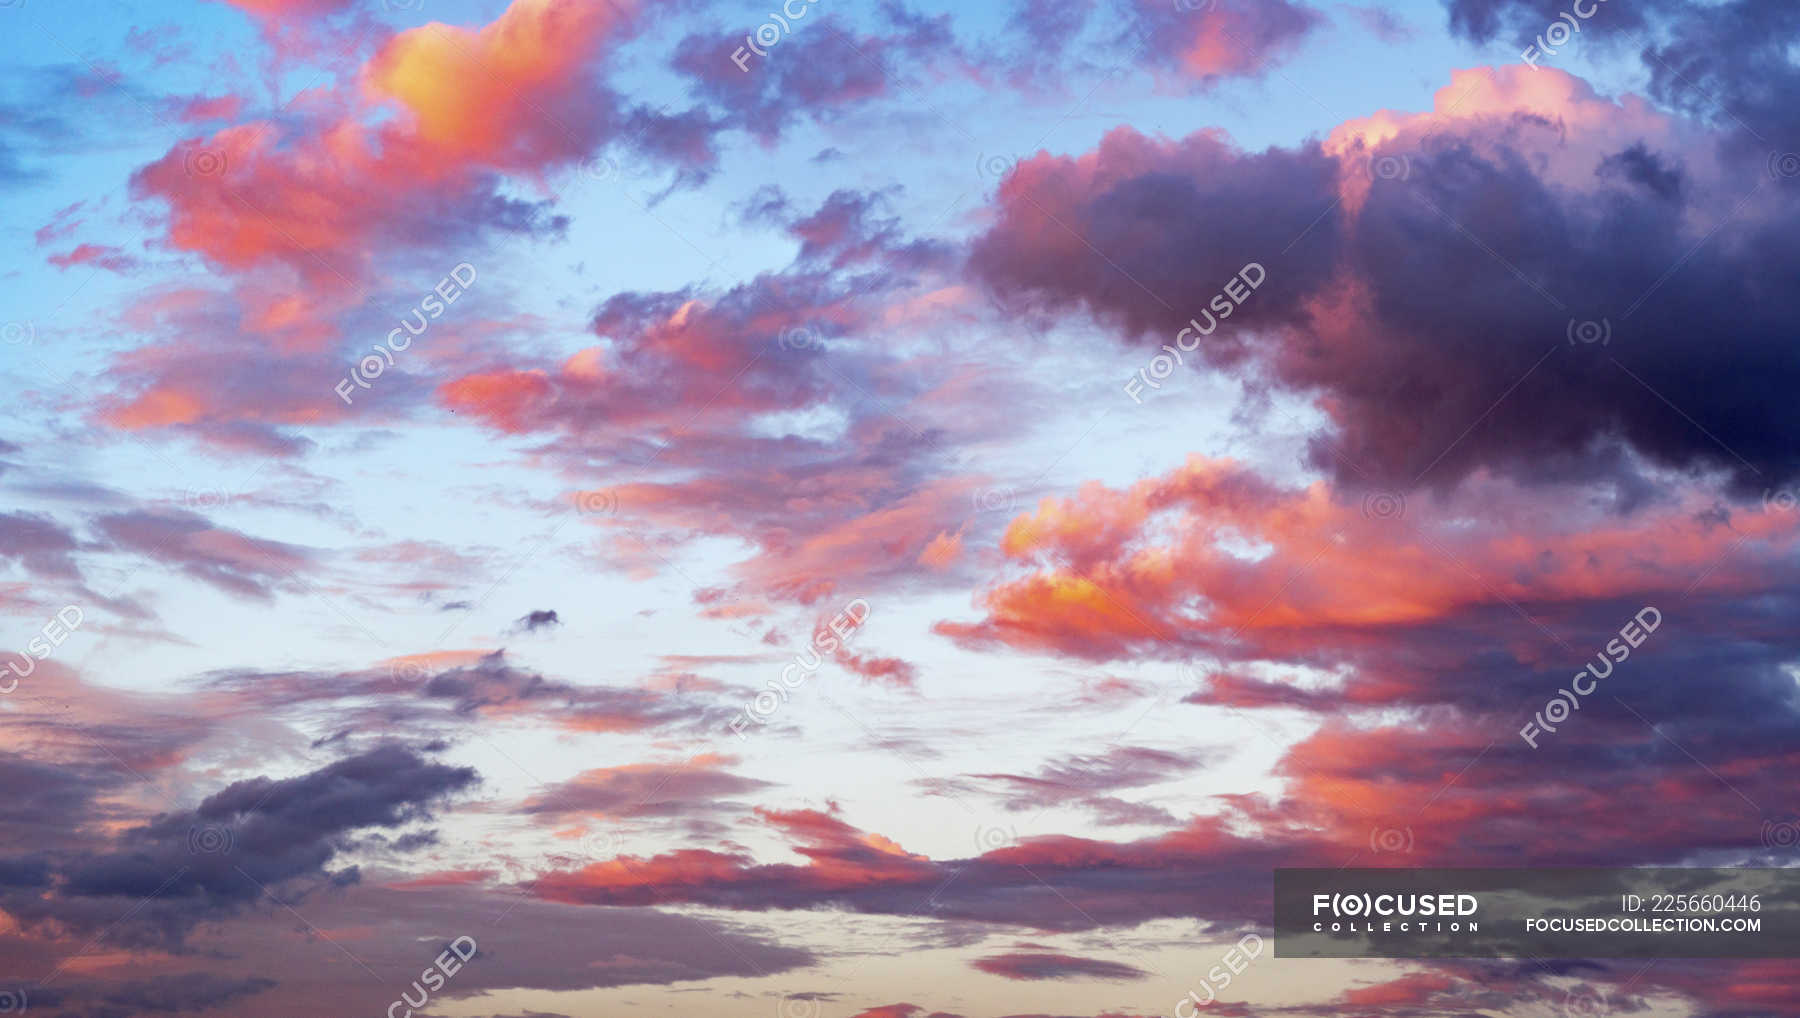 pink sunset lake photograph Digital Download sky purple clouds landscape  colorful nature printable photography